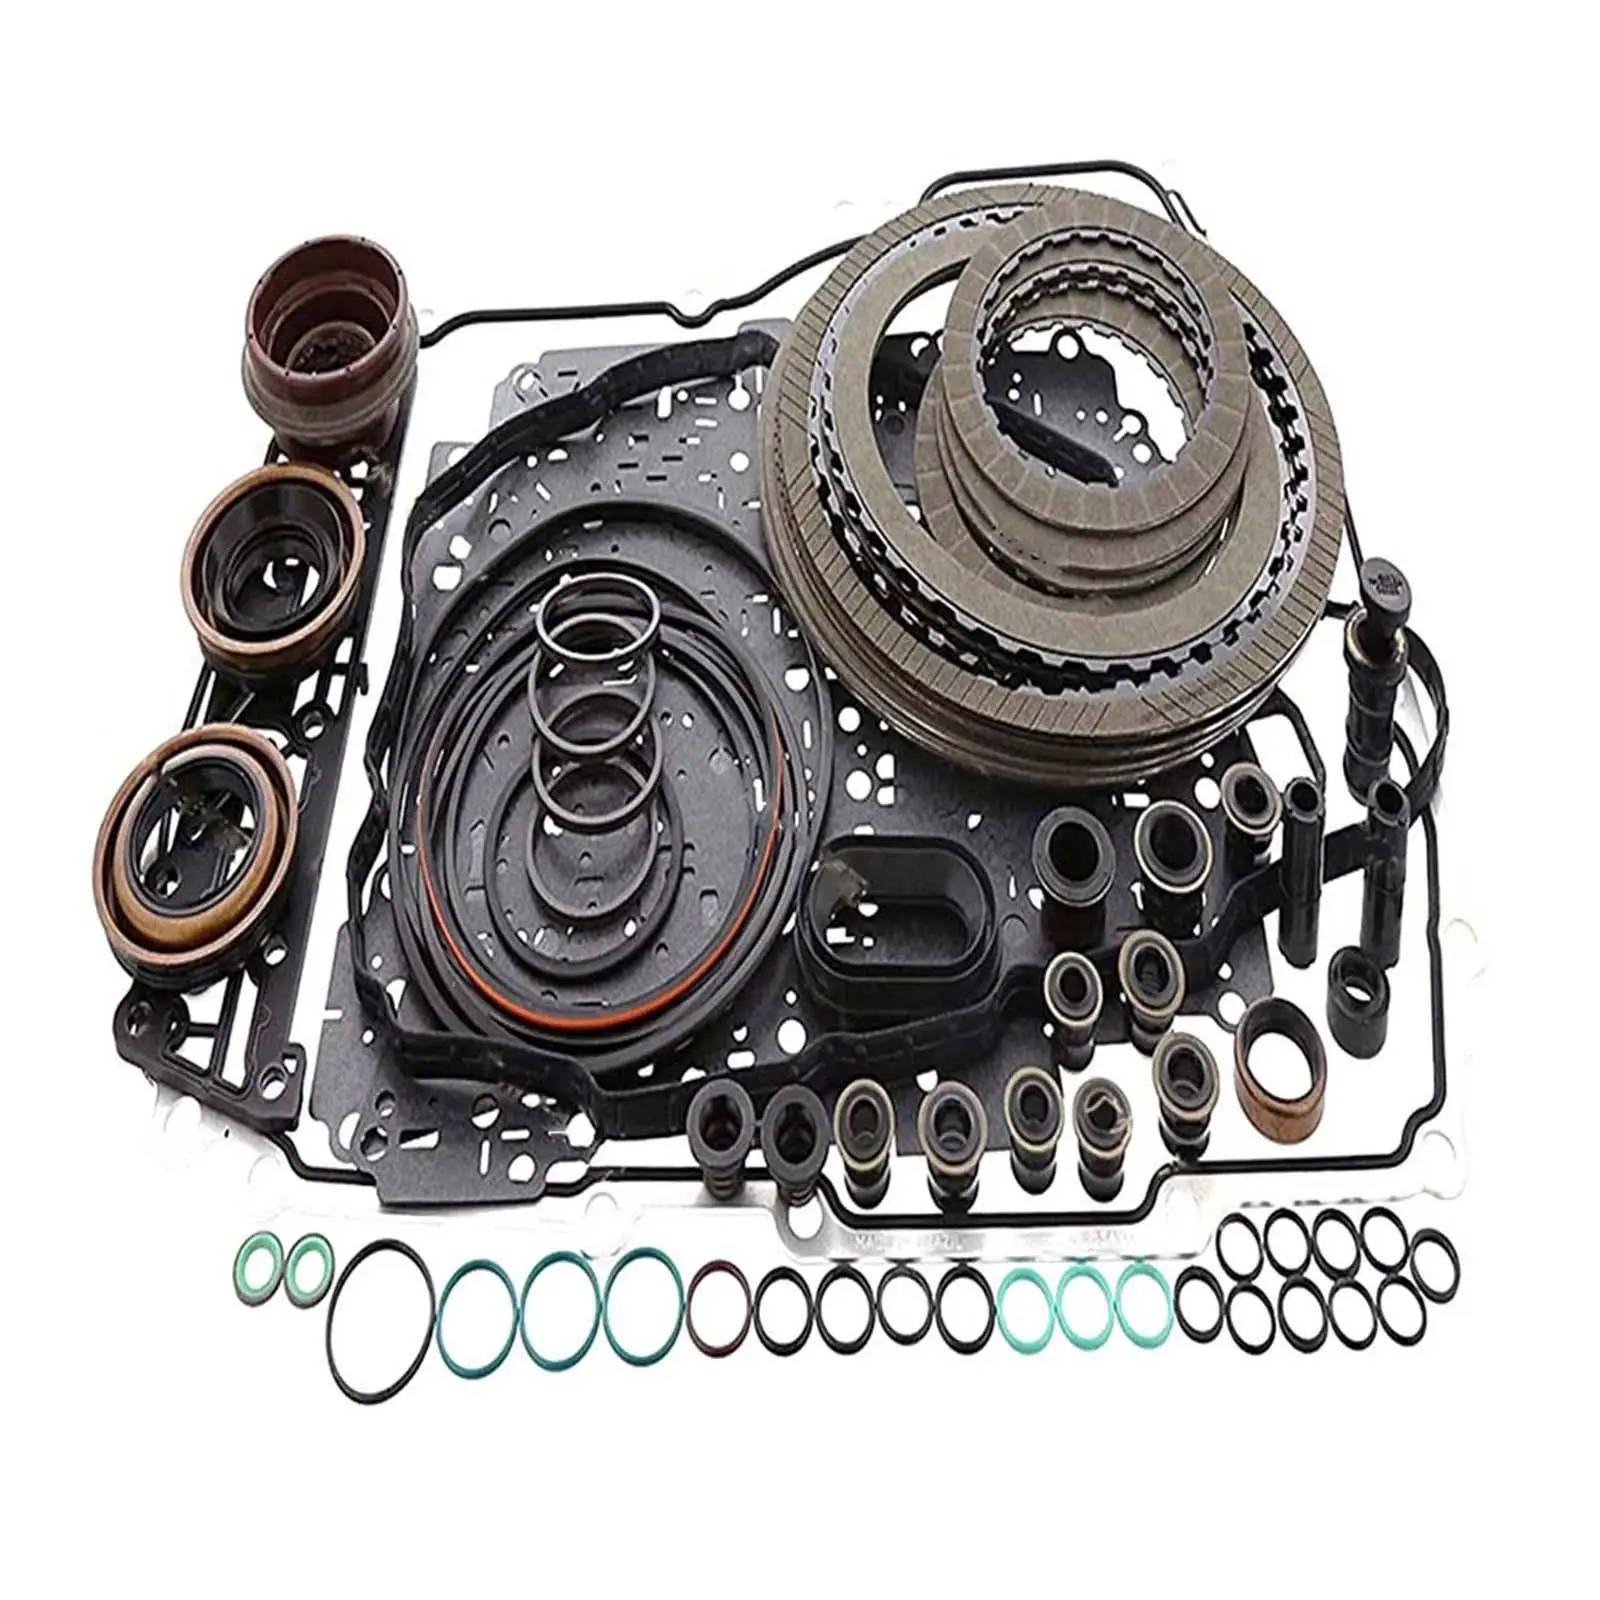 6T40E 6T45E Automatic Transmission Master Overhaul Rebuild Set B204881A Wear Resistance Gaskets Seals O Rings for Chevrolet